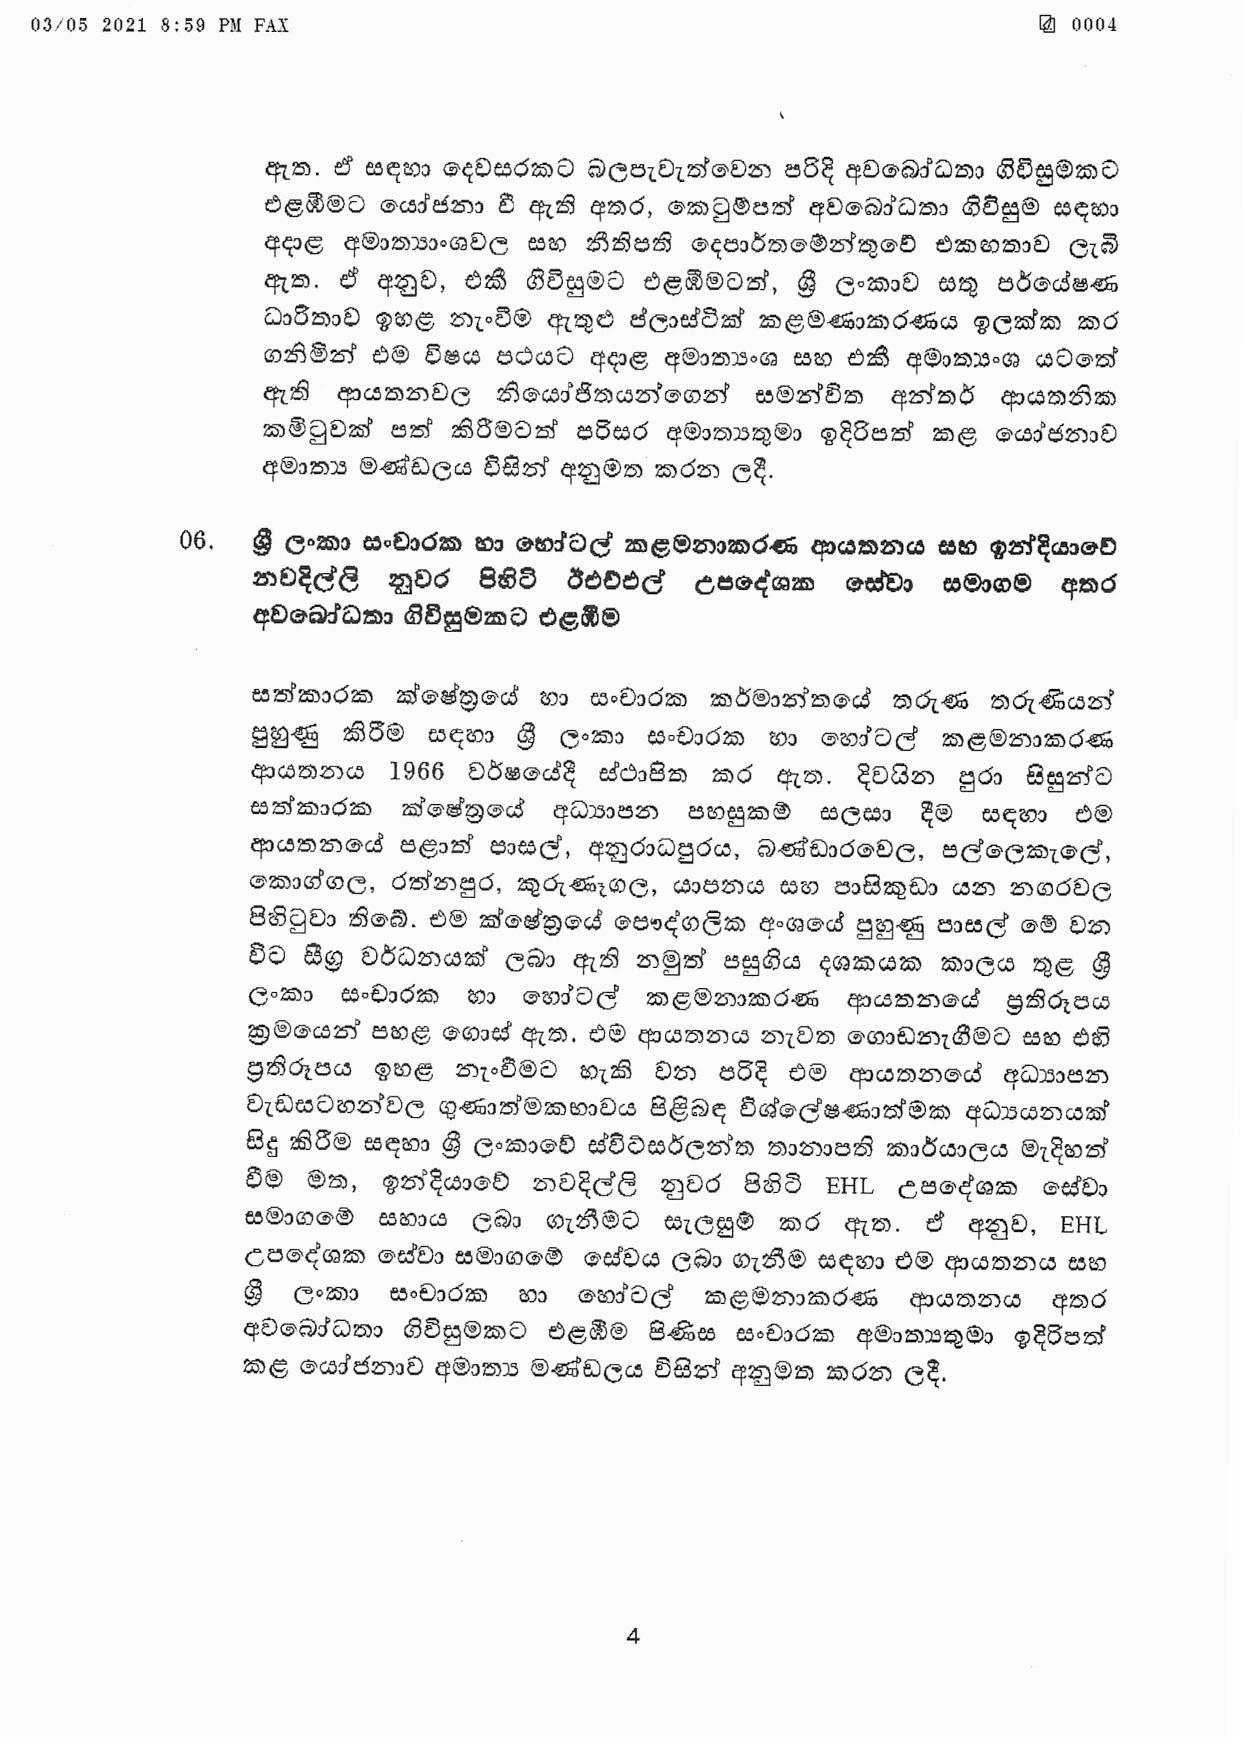 Cabinet Decision on 03.05.2021 page 004